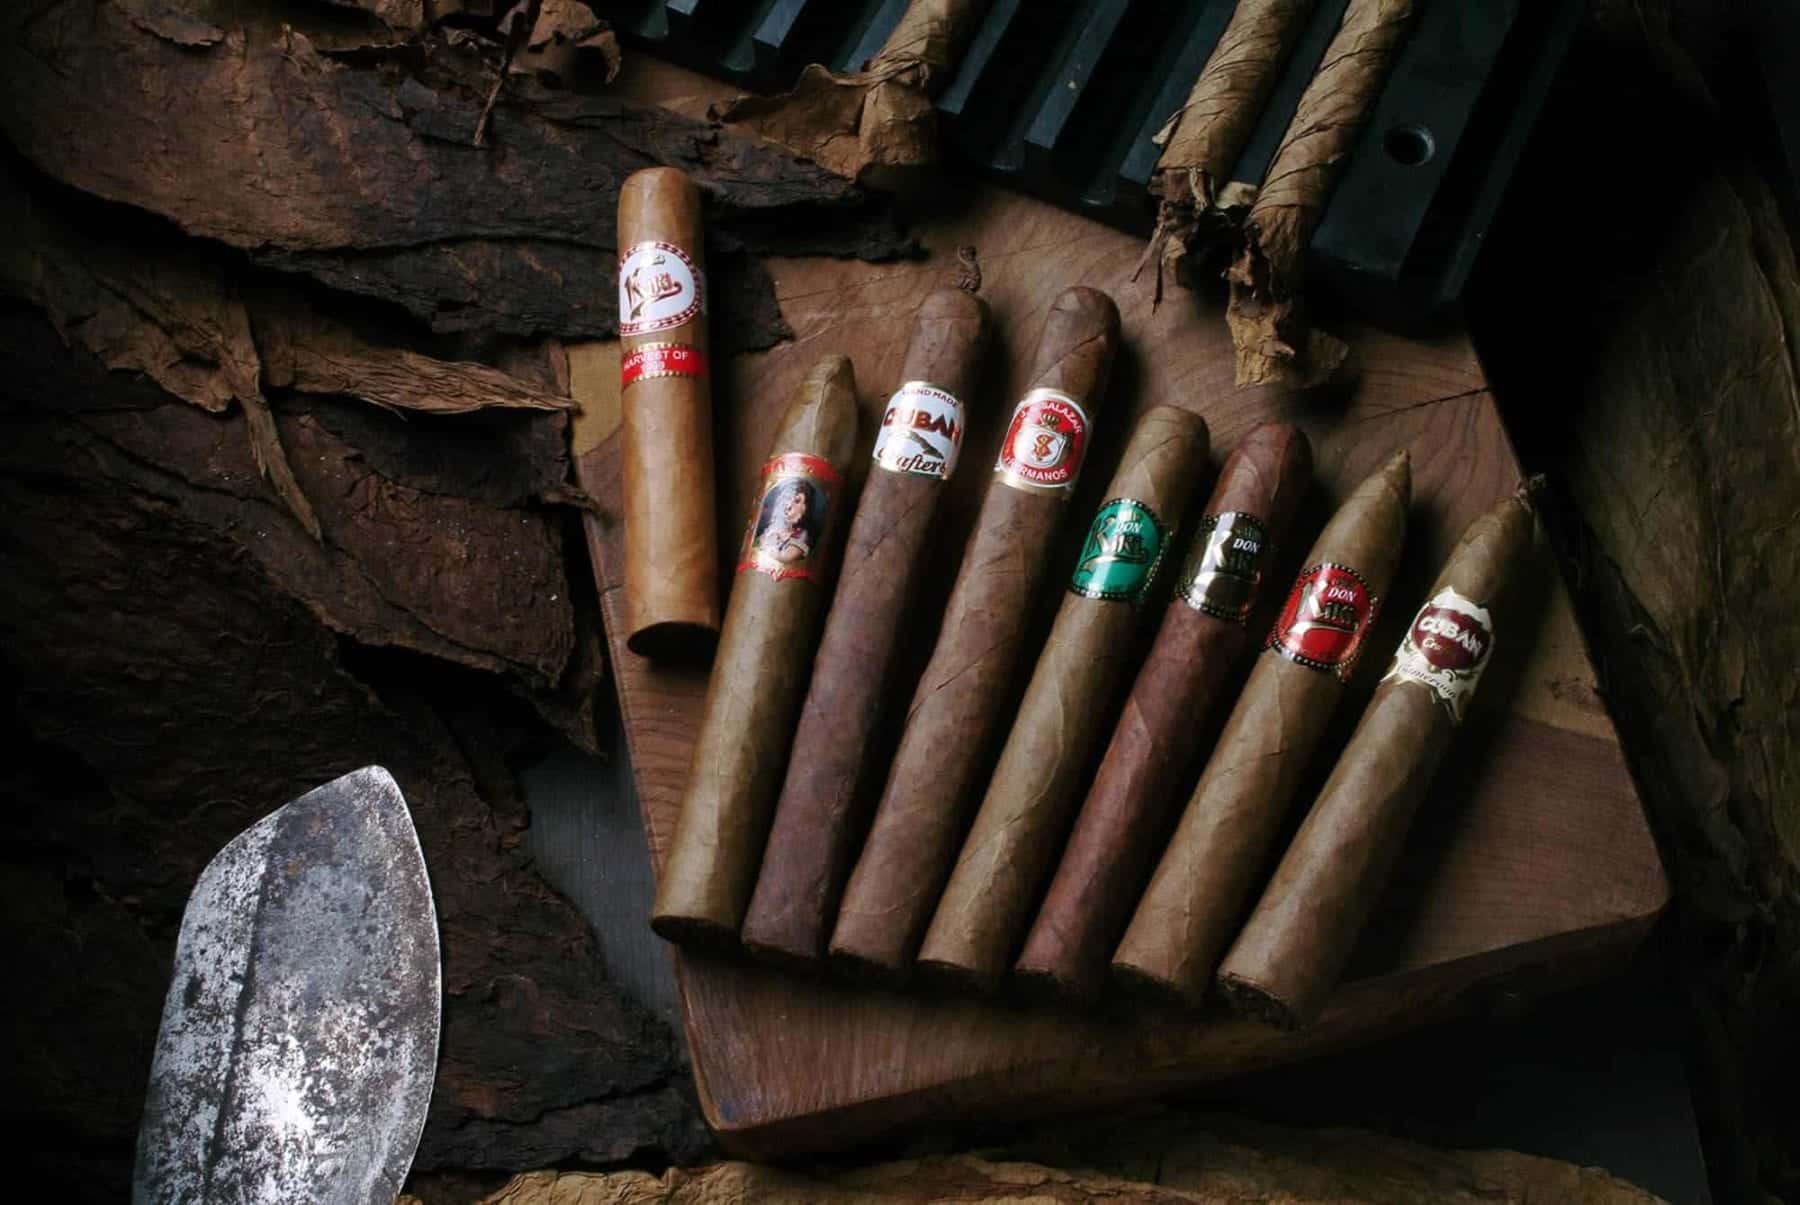 A 2021 Beginner's Guide to Cigars